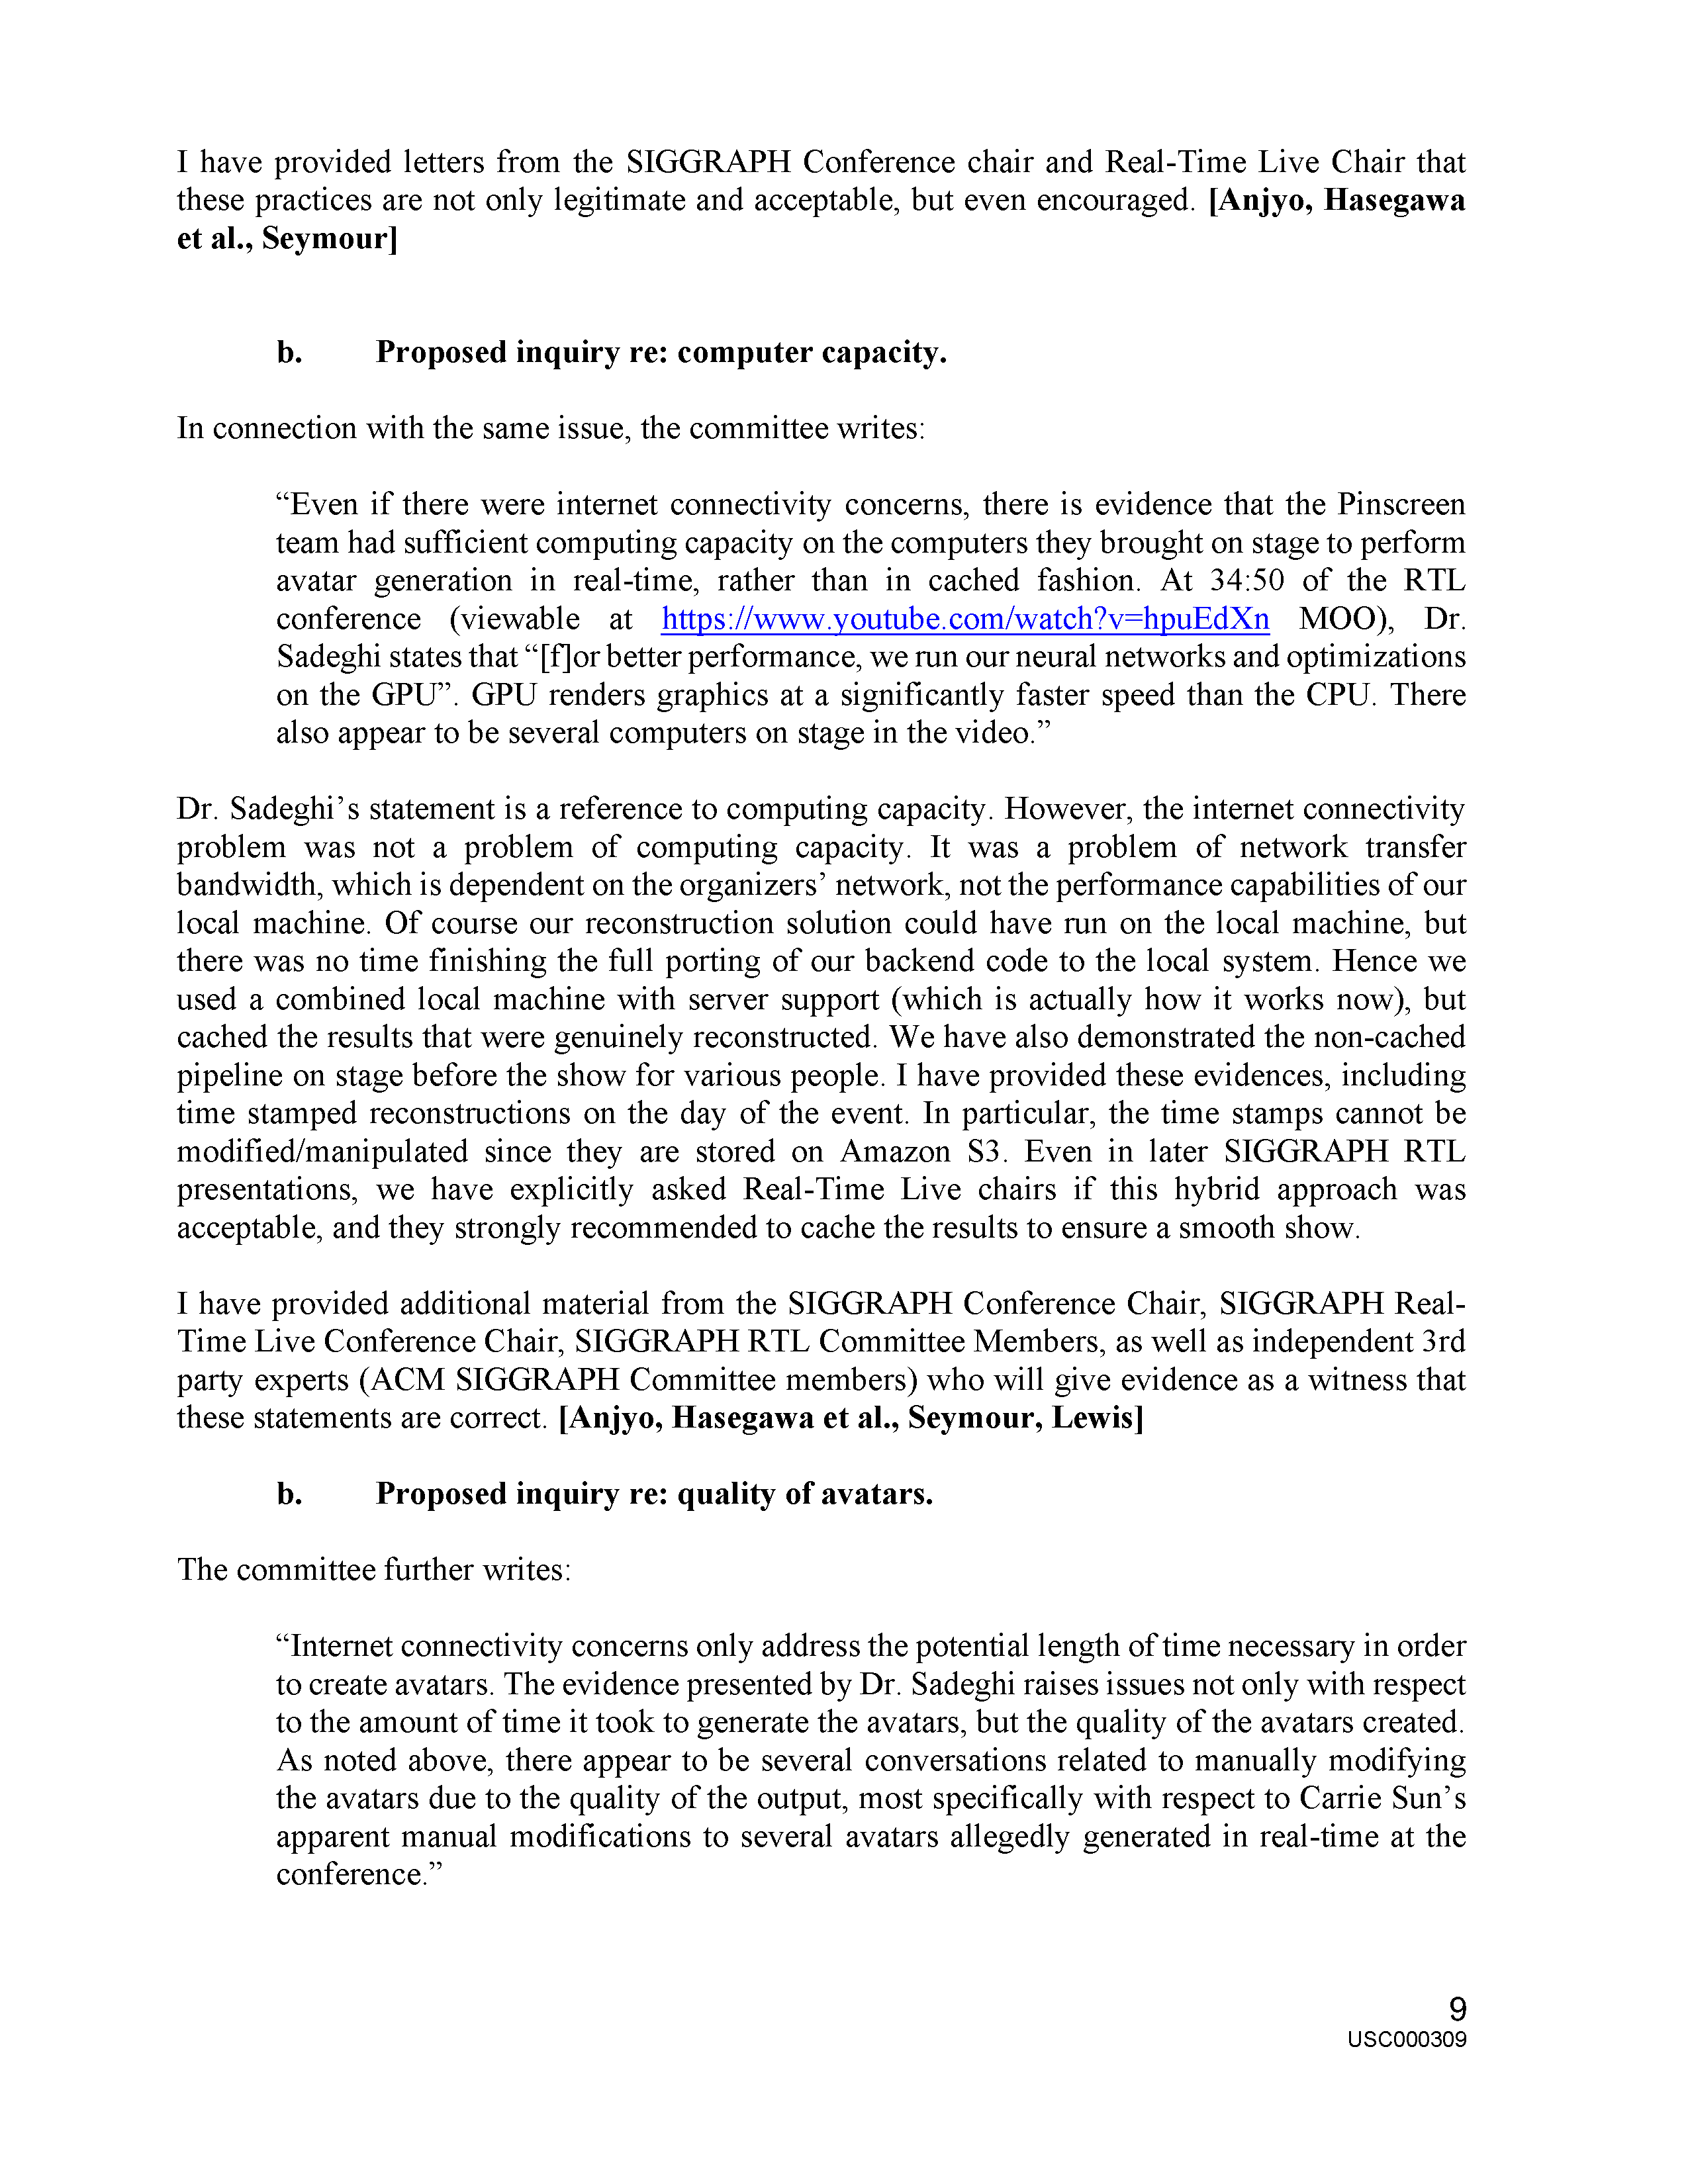 USC's Investigation Report re Hao Li's and Pinscreen's Scientific Misconduct at ACM SIGGRAPH RTL 2017 [Summary] Page 39